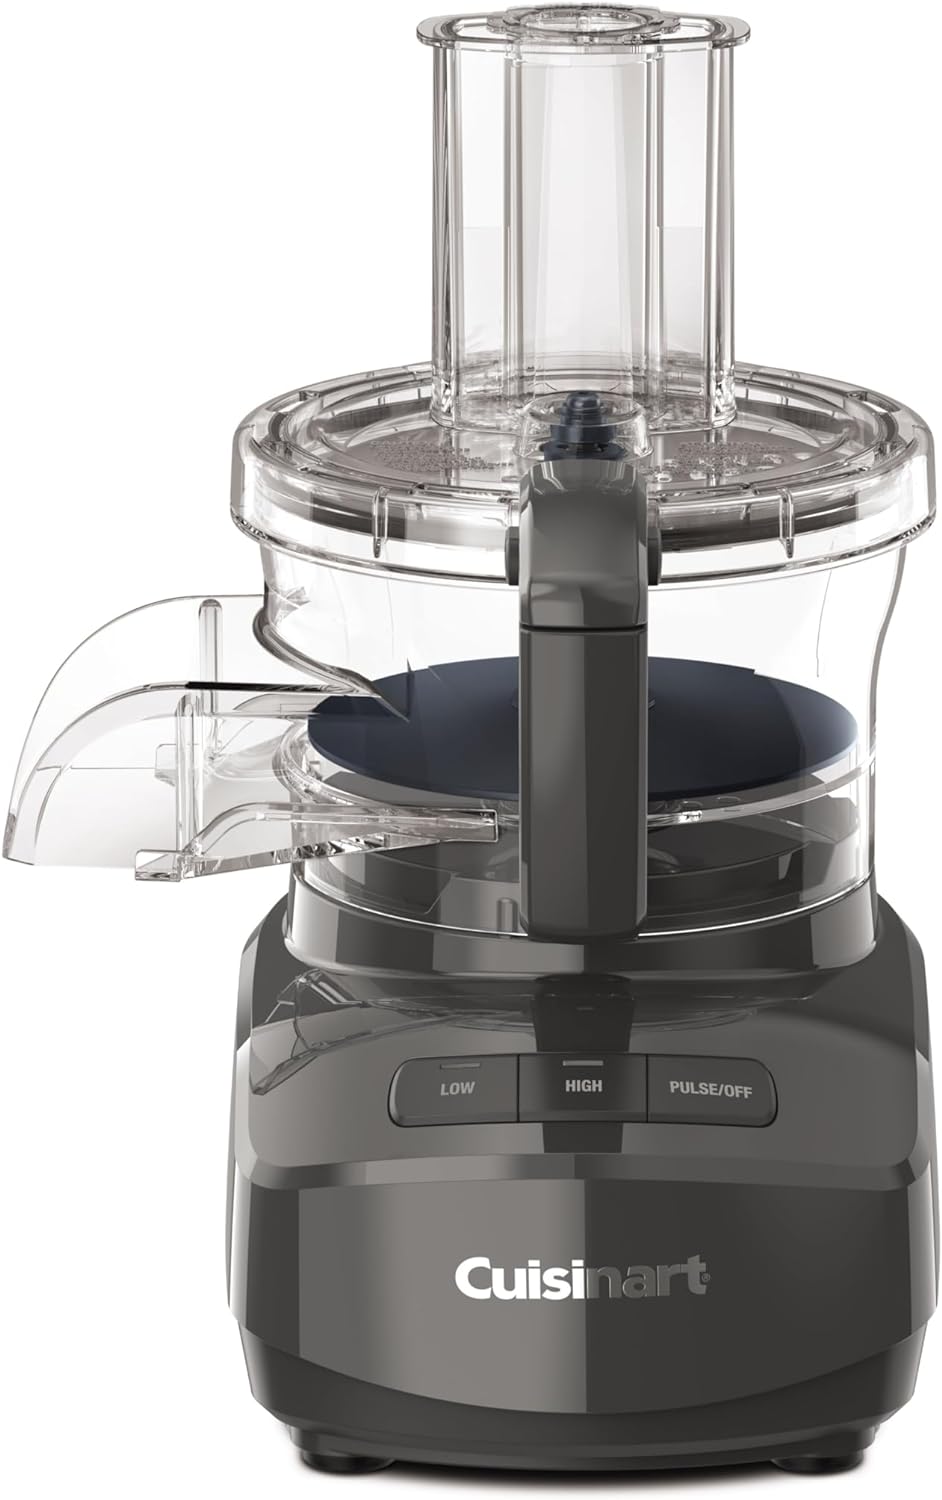 Electric Food Processor - 9 Cup Continuous Feed Food Processor with Reversible Shredding and Slicing Disc